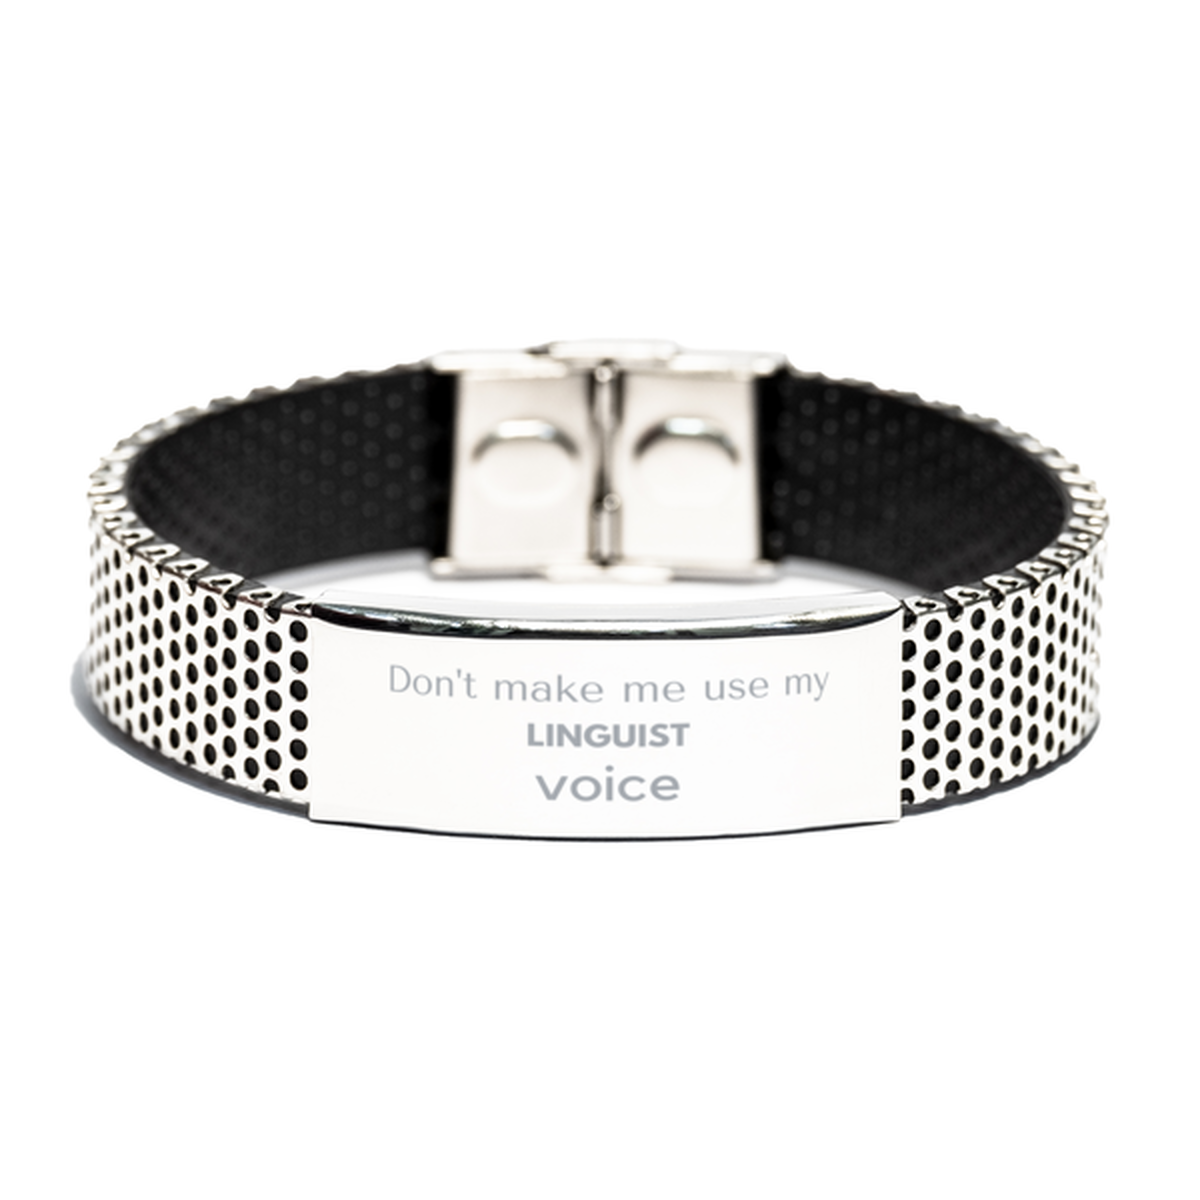 Don't make me use my Linguist voice, Sarcasm Linguist Gifts, Christmas Linguist Stainless Steel Bracelet Birthday Unique Gifts For Linguist Coworkers, Men, Women, Colleague, Friends